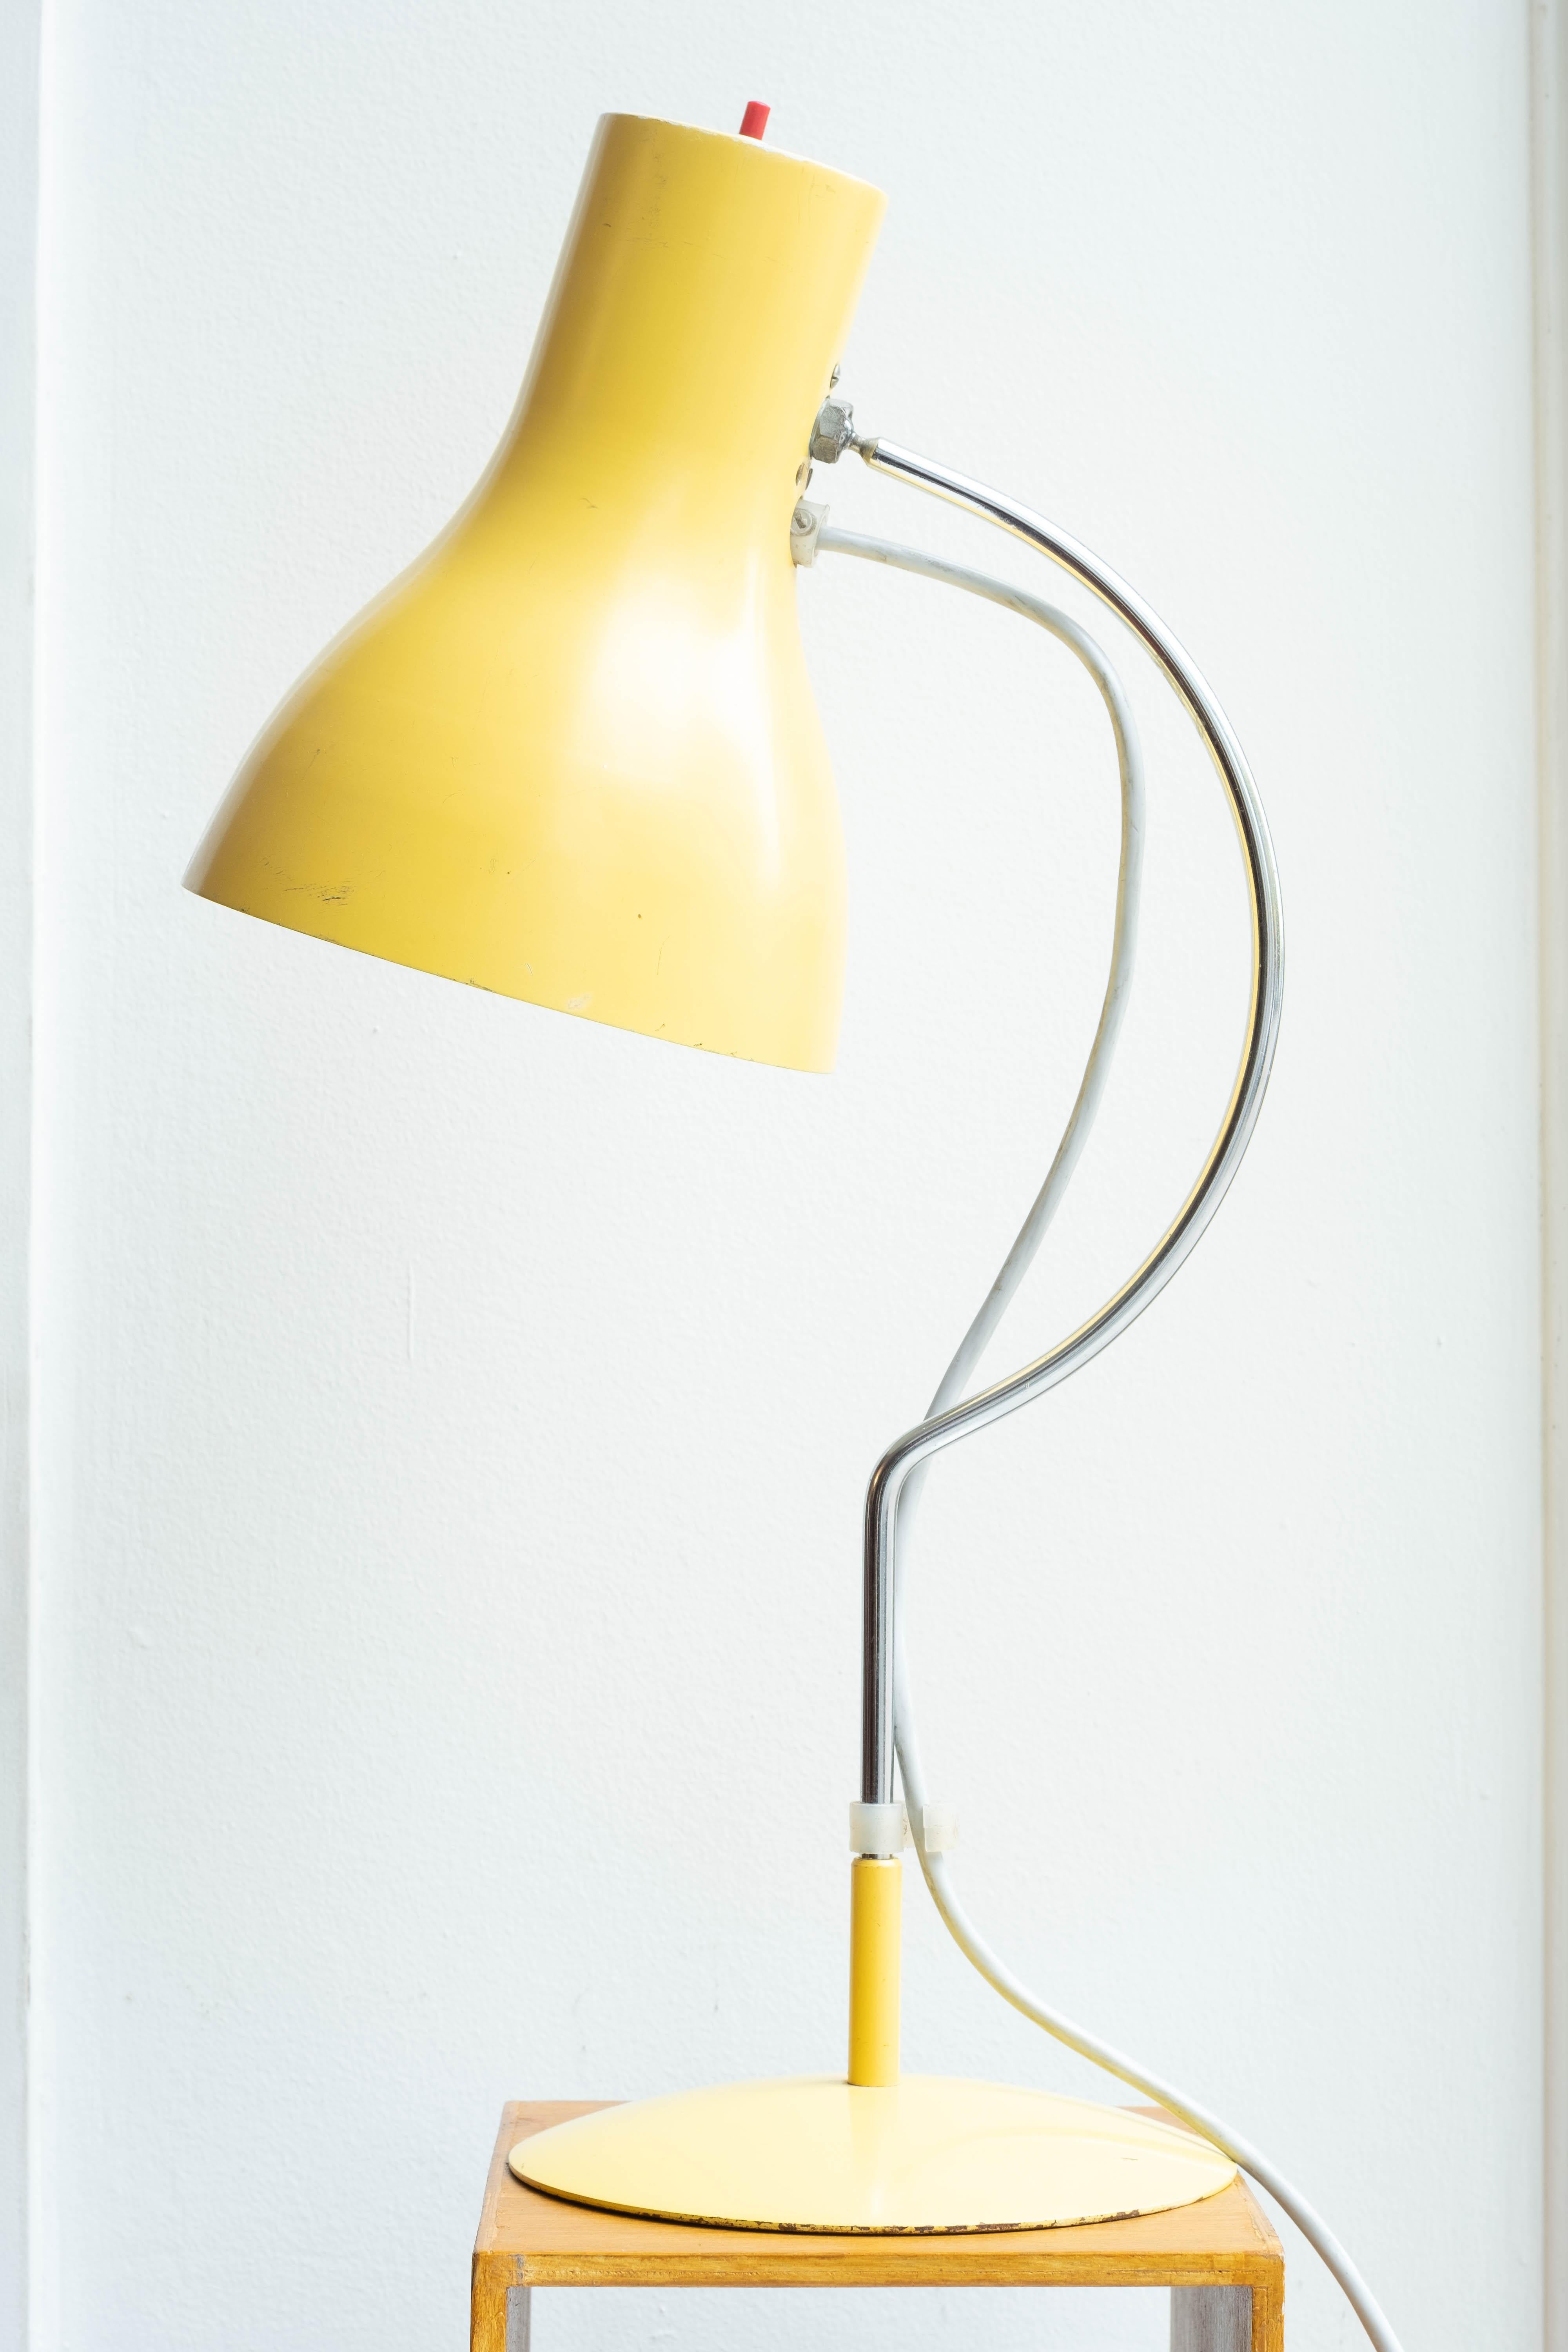 Metal Midcentury Yellow Table Lamp from Chech Designer Josef Hurka, 1970s For Sale